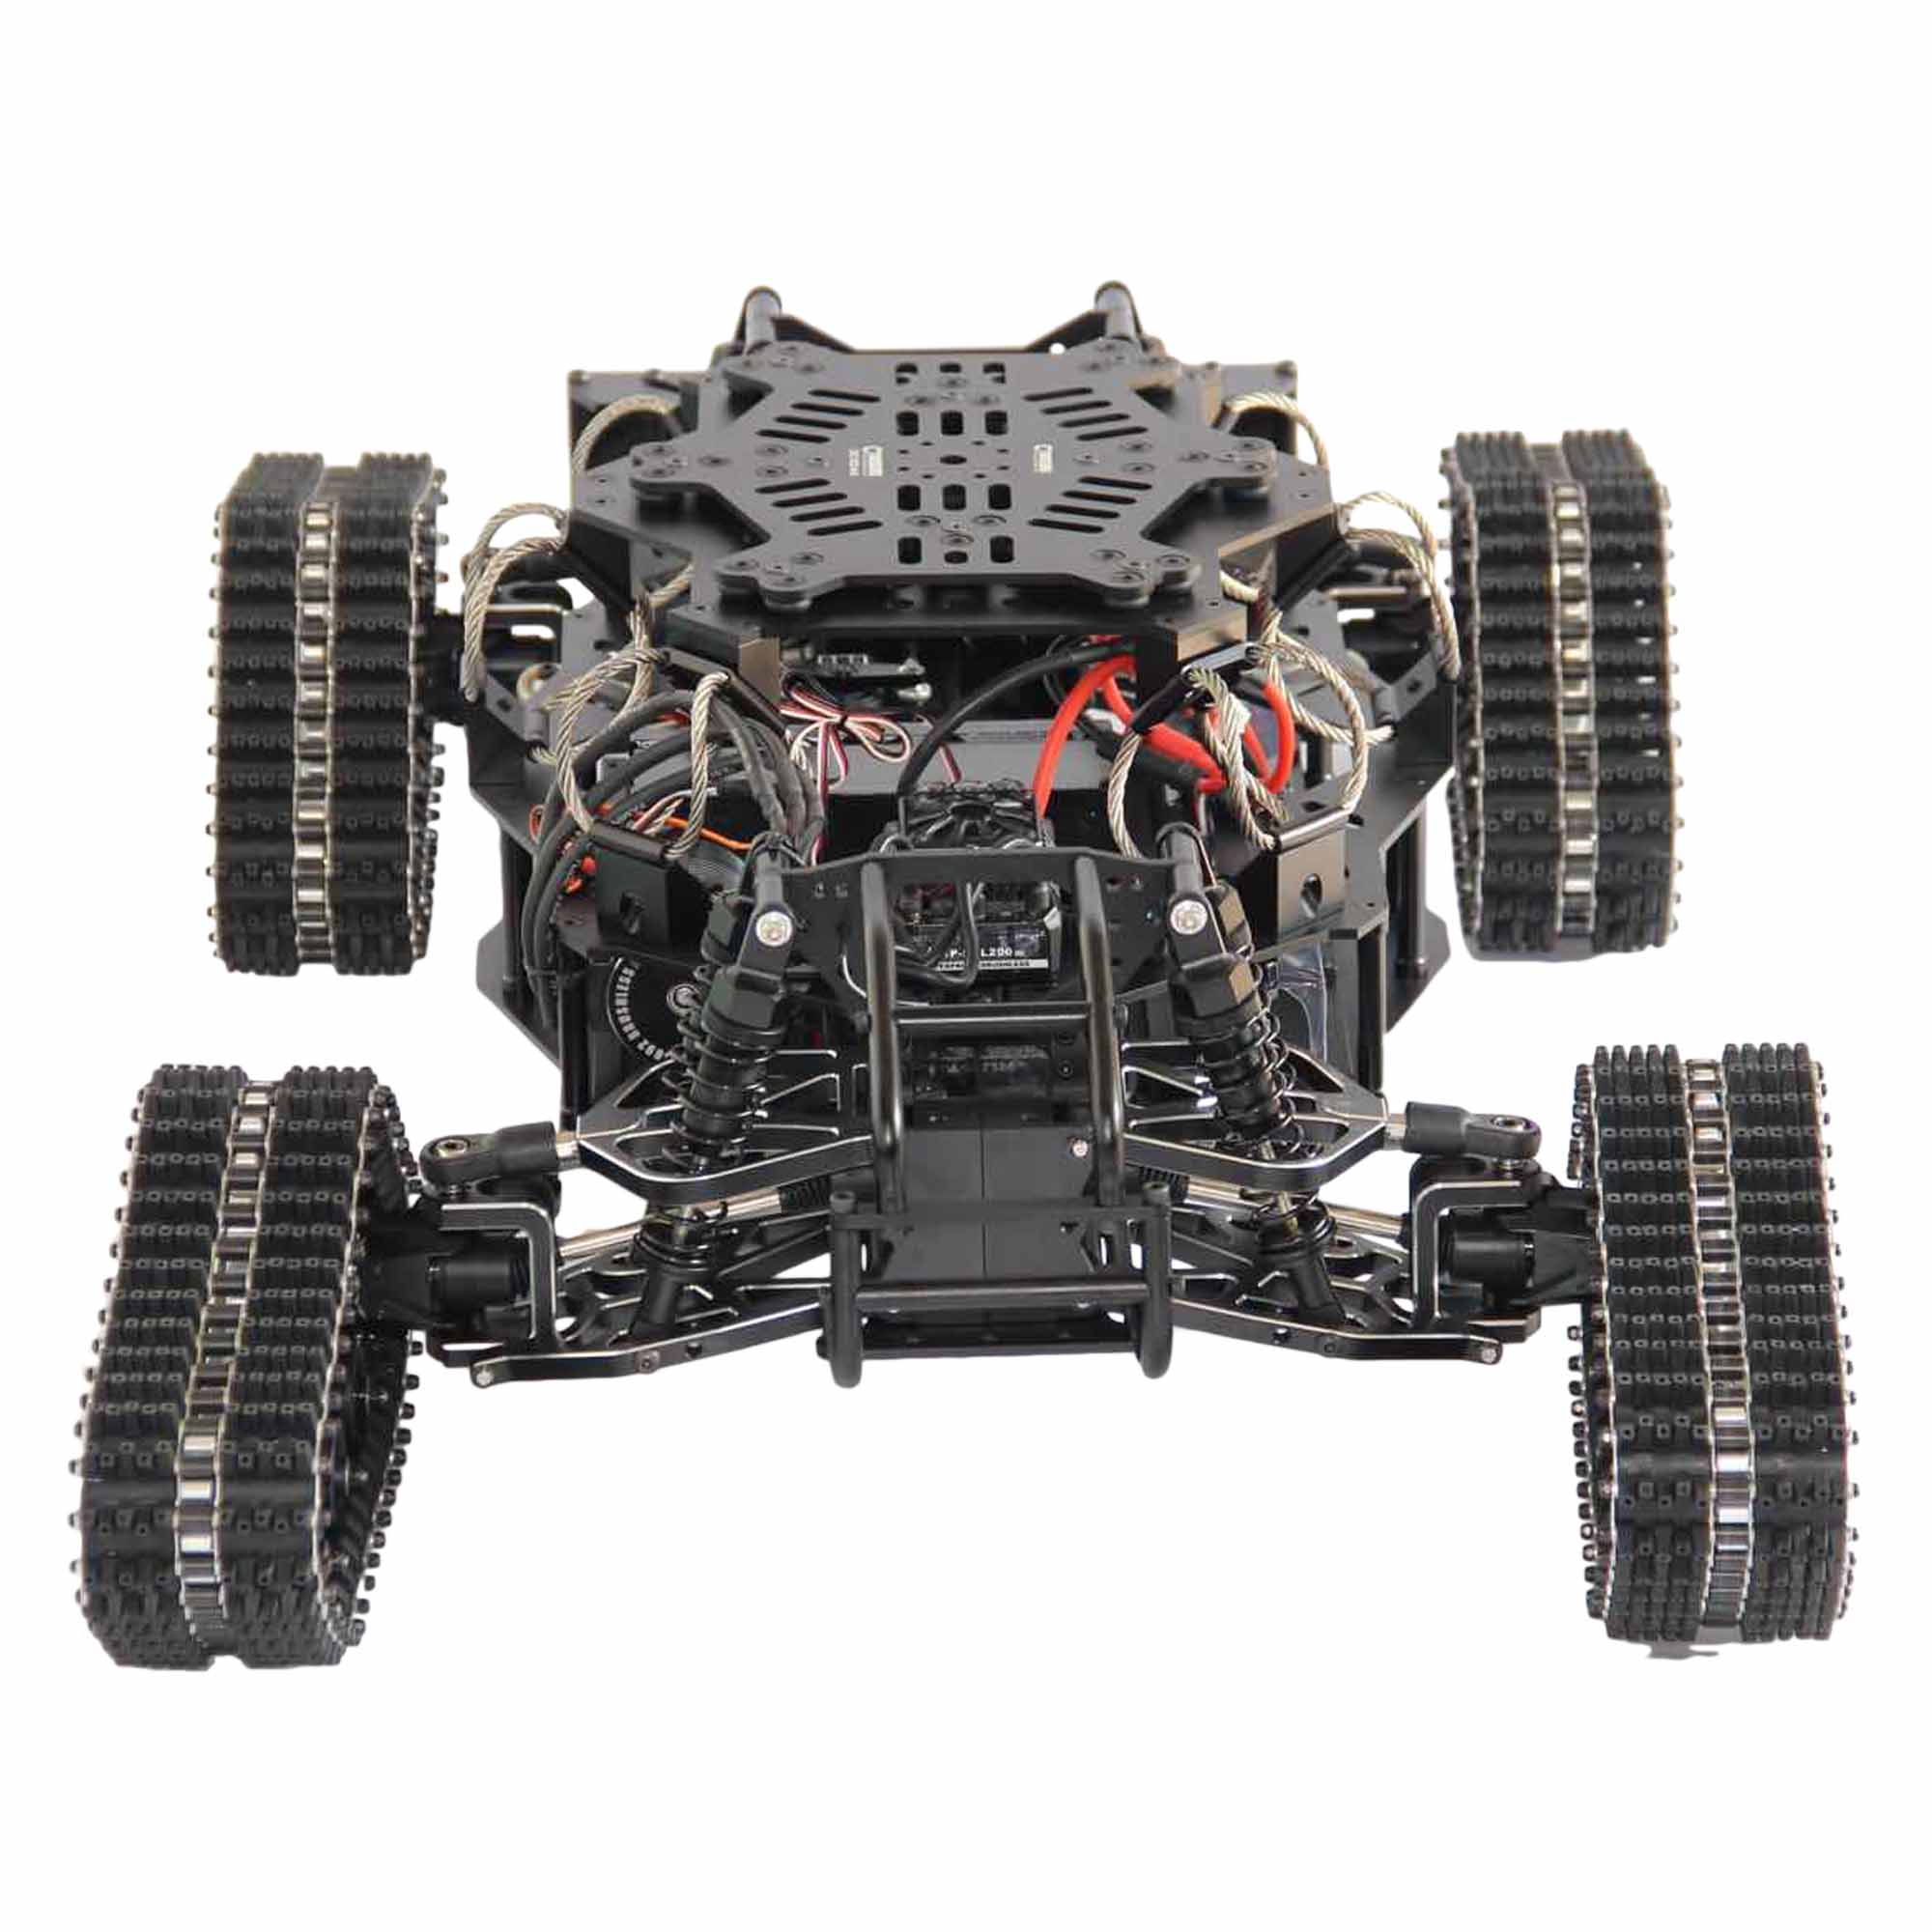 CINE RC 4 × 4 All-Wheel Drive Rover Gimbal Car Package